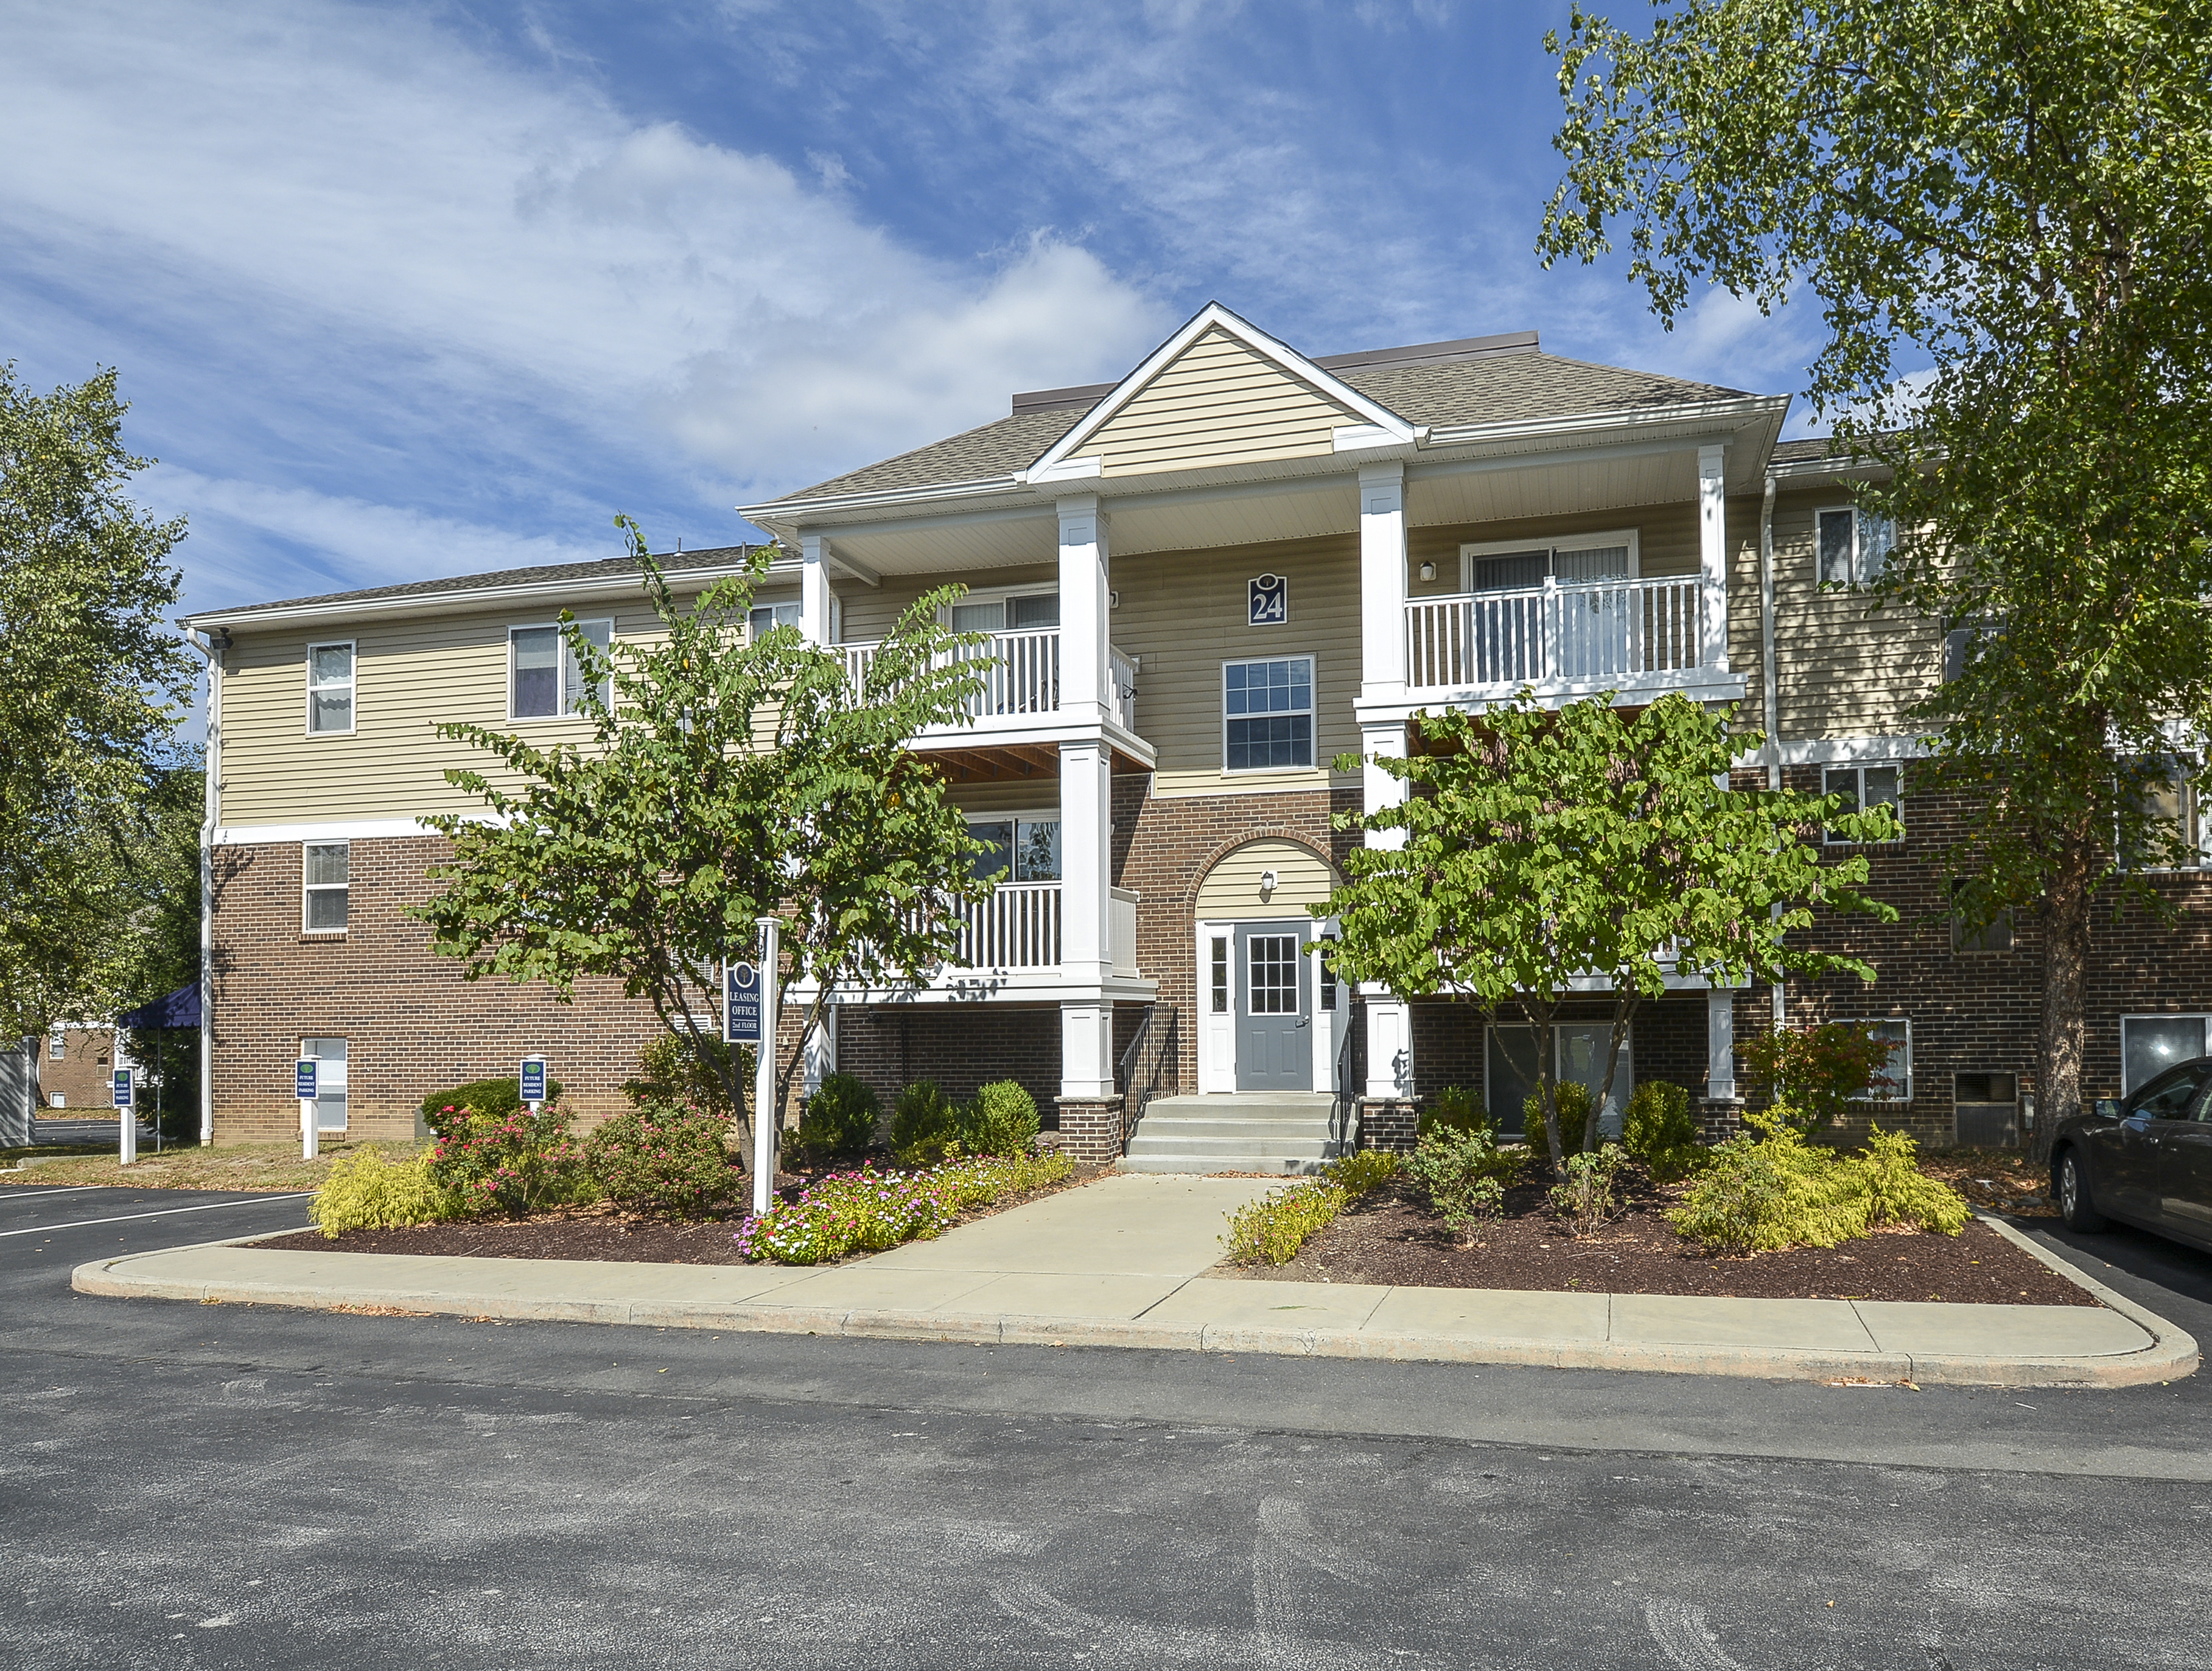 Glen Eagle Village Leasing and Management Office with Shrubs and Walkway | Newark Apartments Near DE